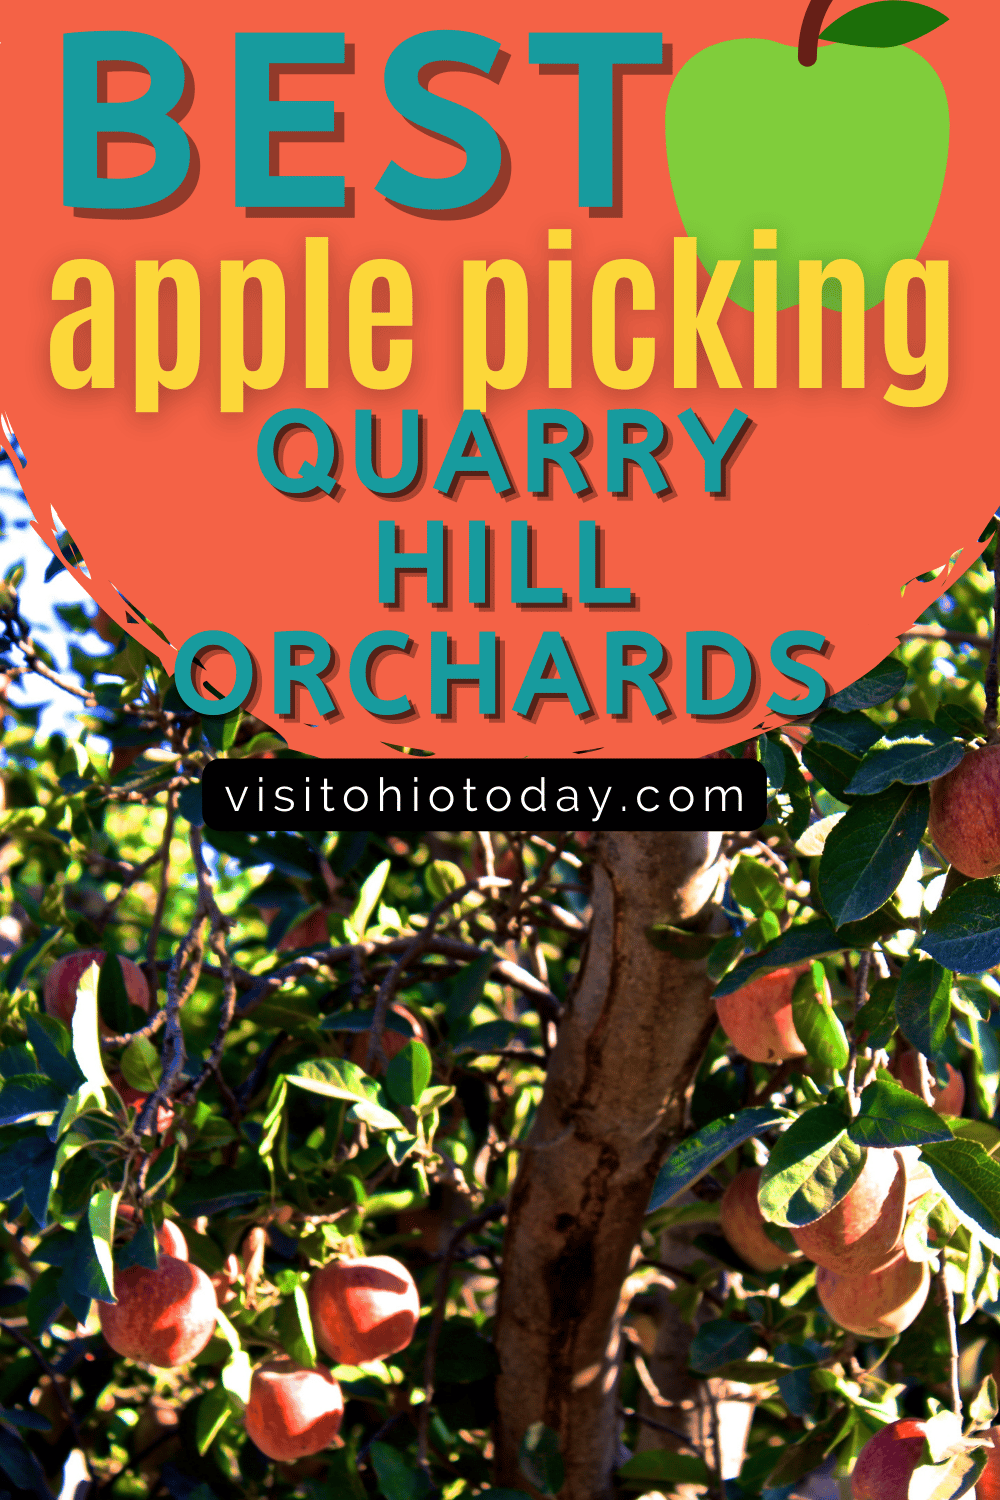 Text overlay saying best apple picking quarry hill orchards. Underneath is an image of an apple tree